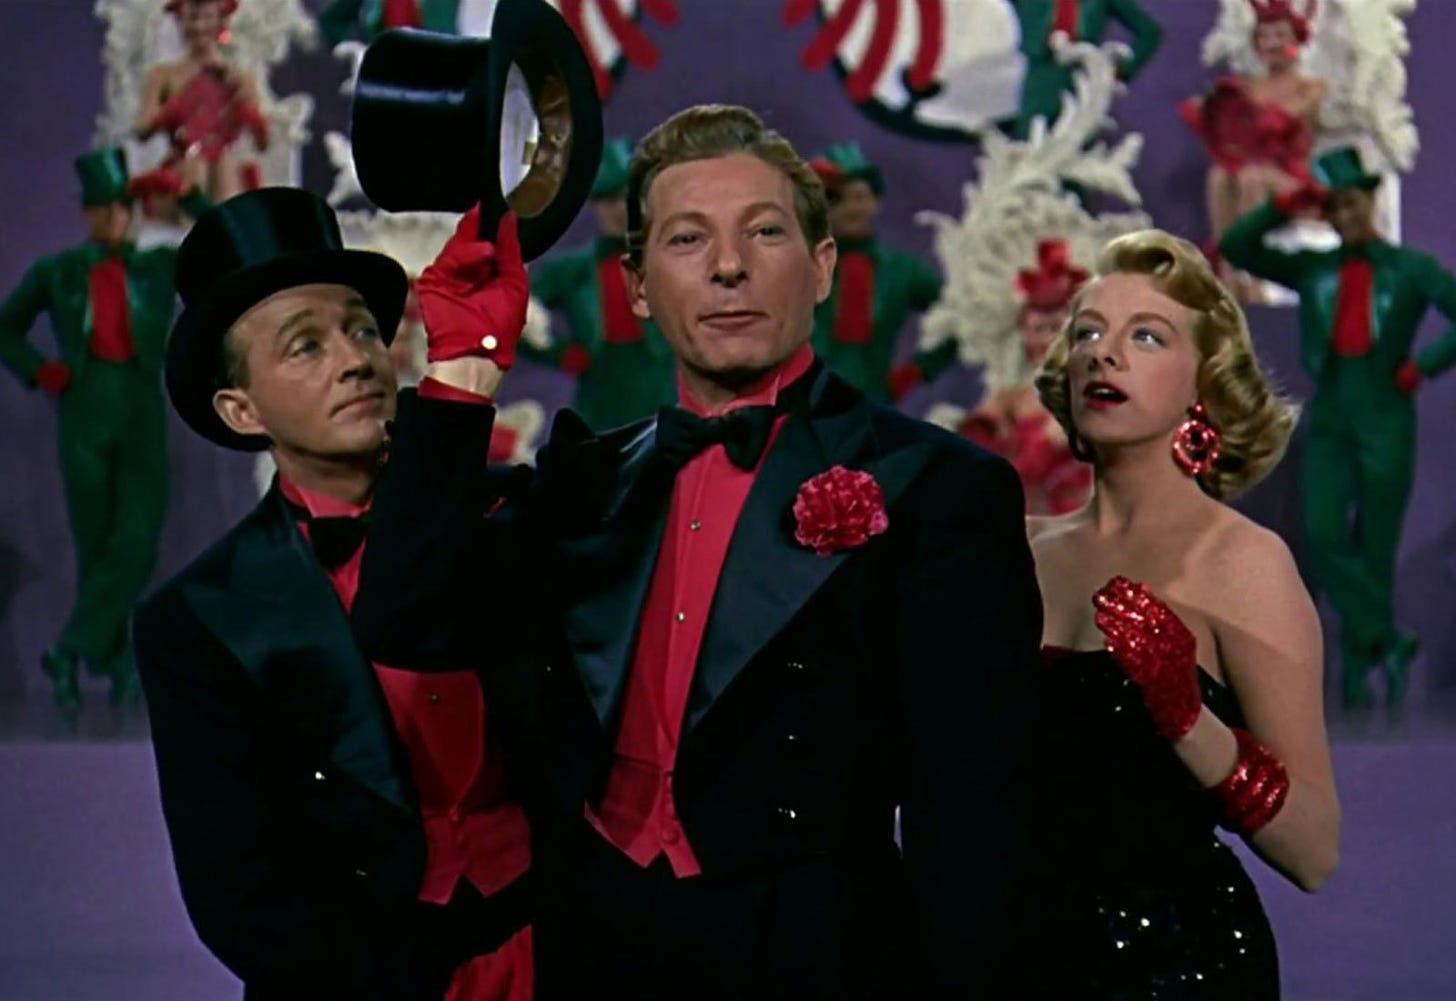 A still from a dance number in the movie White Christmas, featuring Danny Kaye, Bing Crosby, and Rosemary Clooney. Kaye and Crosby are wearing tuxedos with red shirts, red gloves and black top hats. Clooney is wearing a black dress with red gloves. 